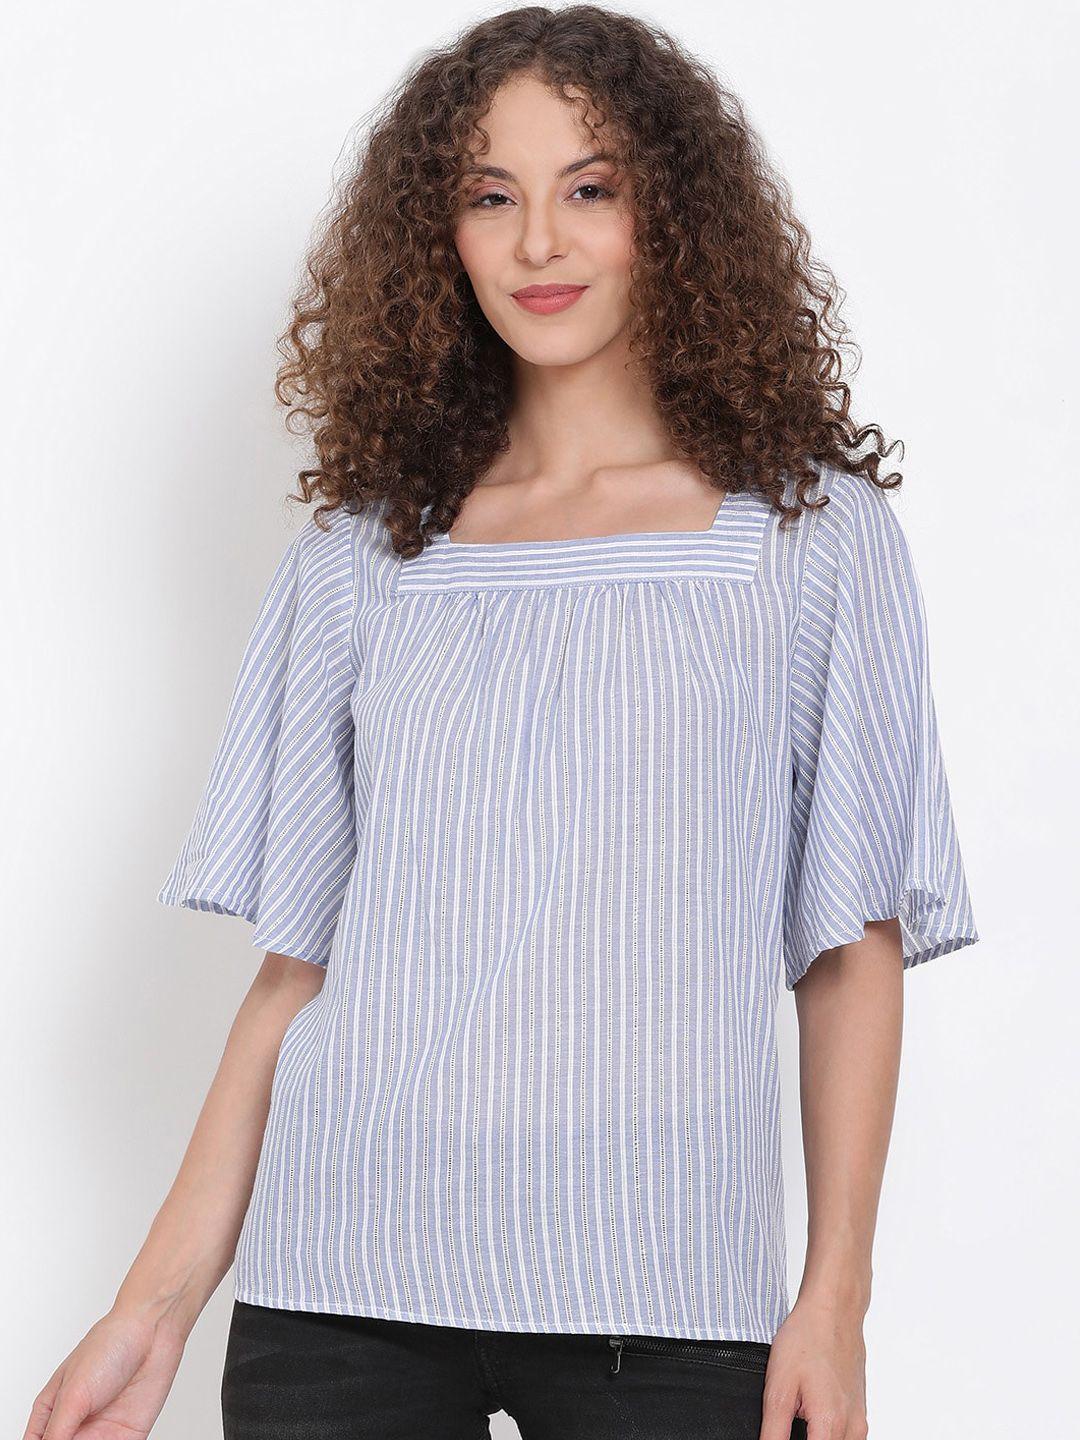 oxolloxo blue & white striped flutter sleeves top